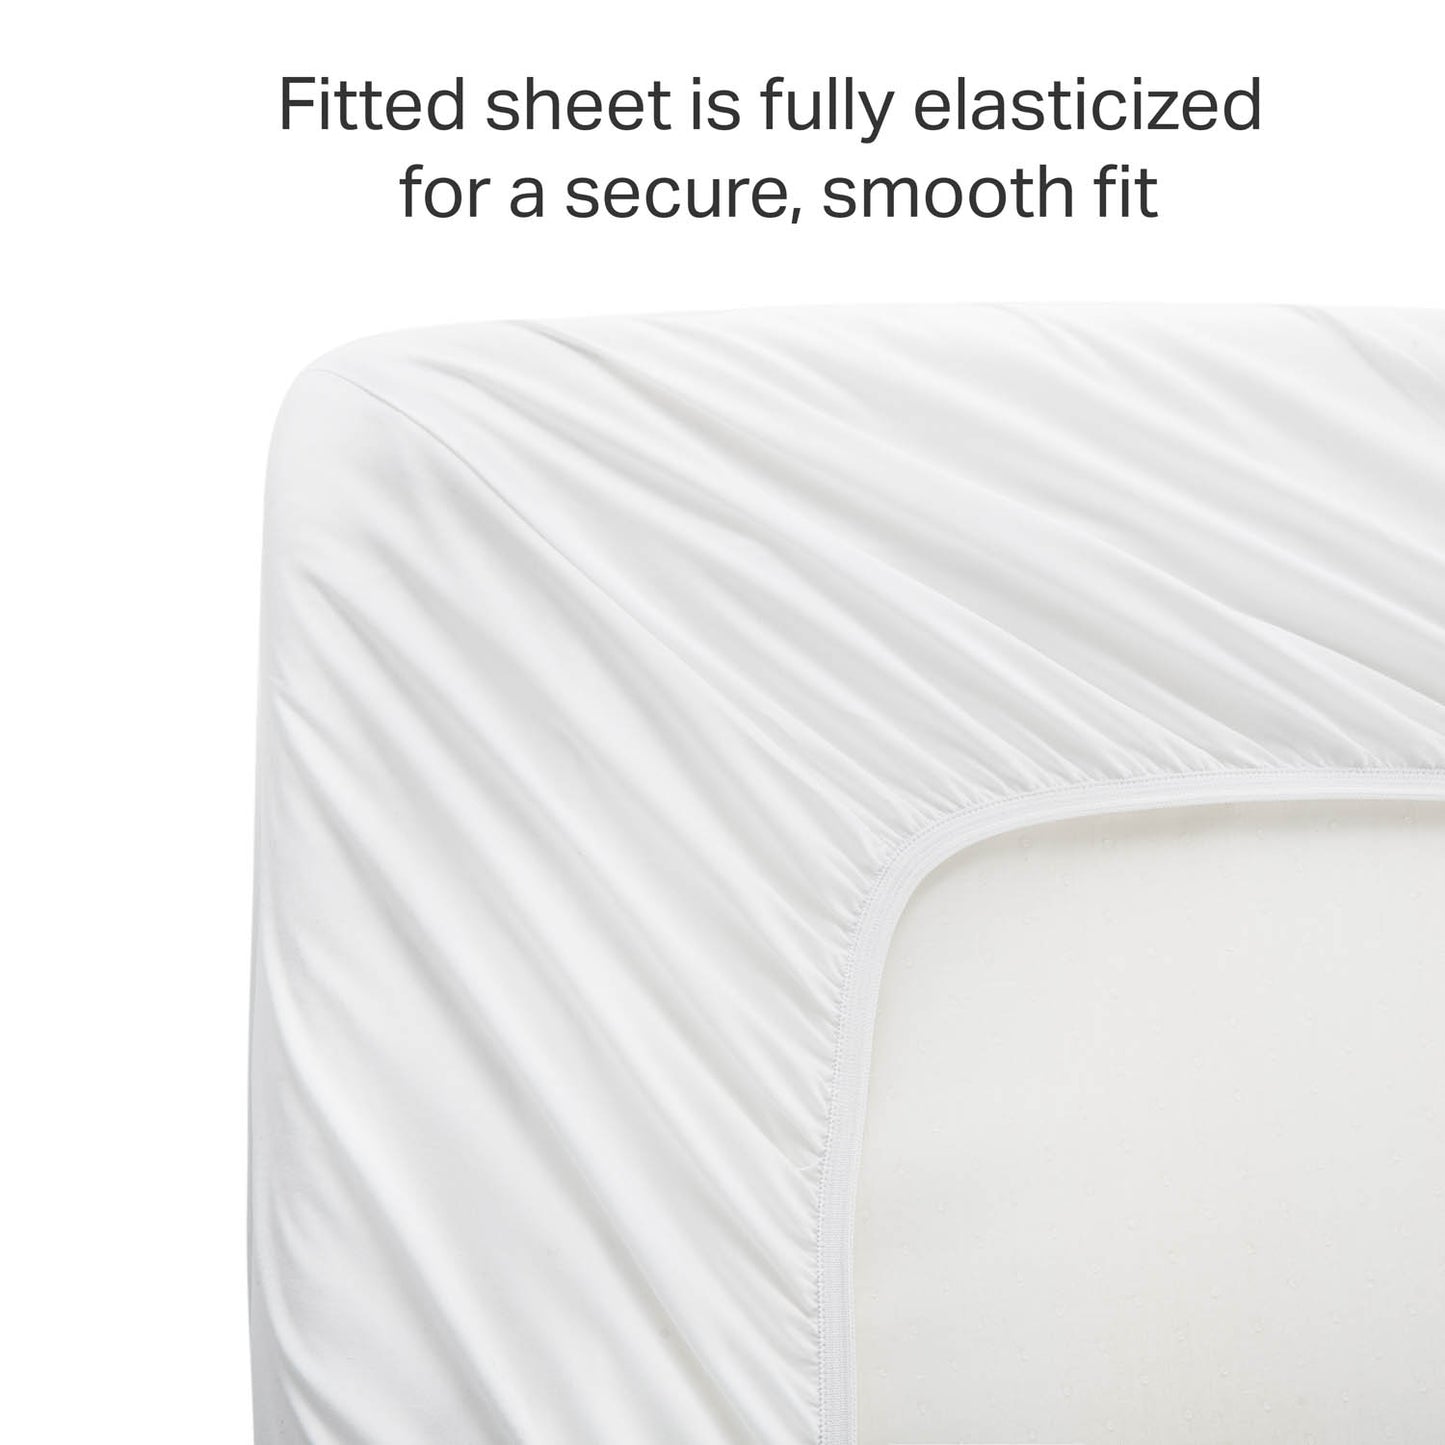 Weekender Hotel Fitted Sheet, Cal King, White